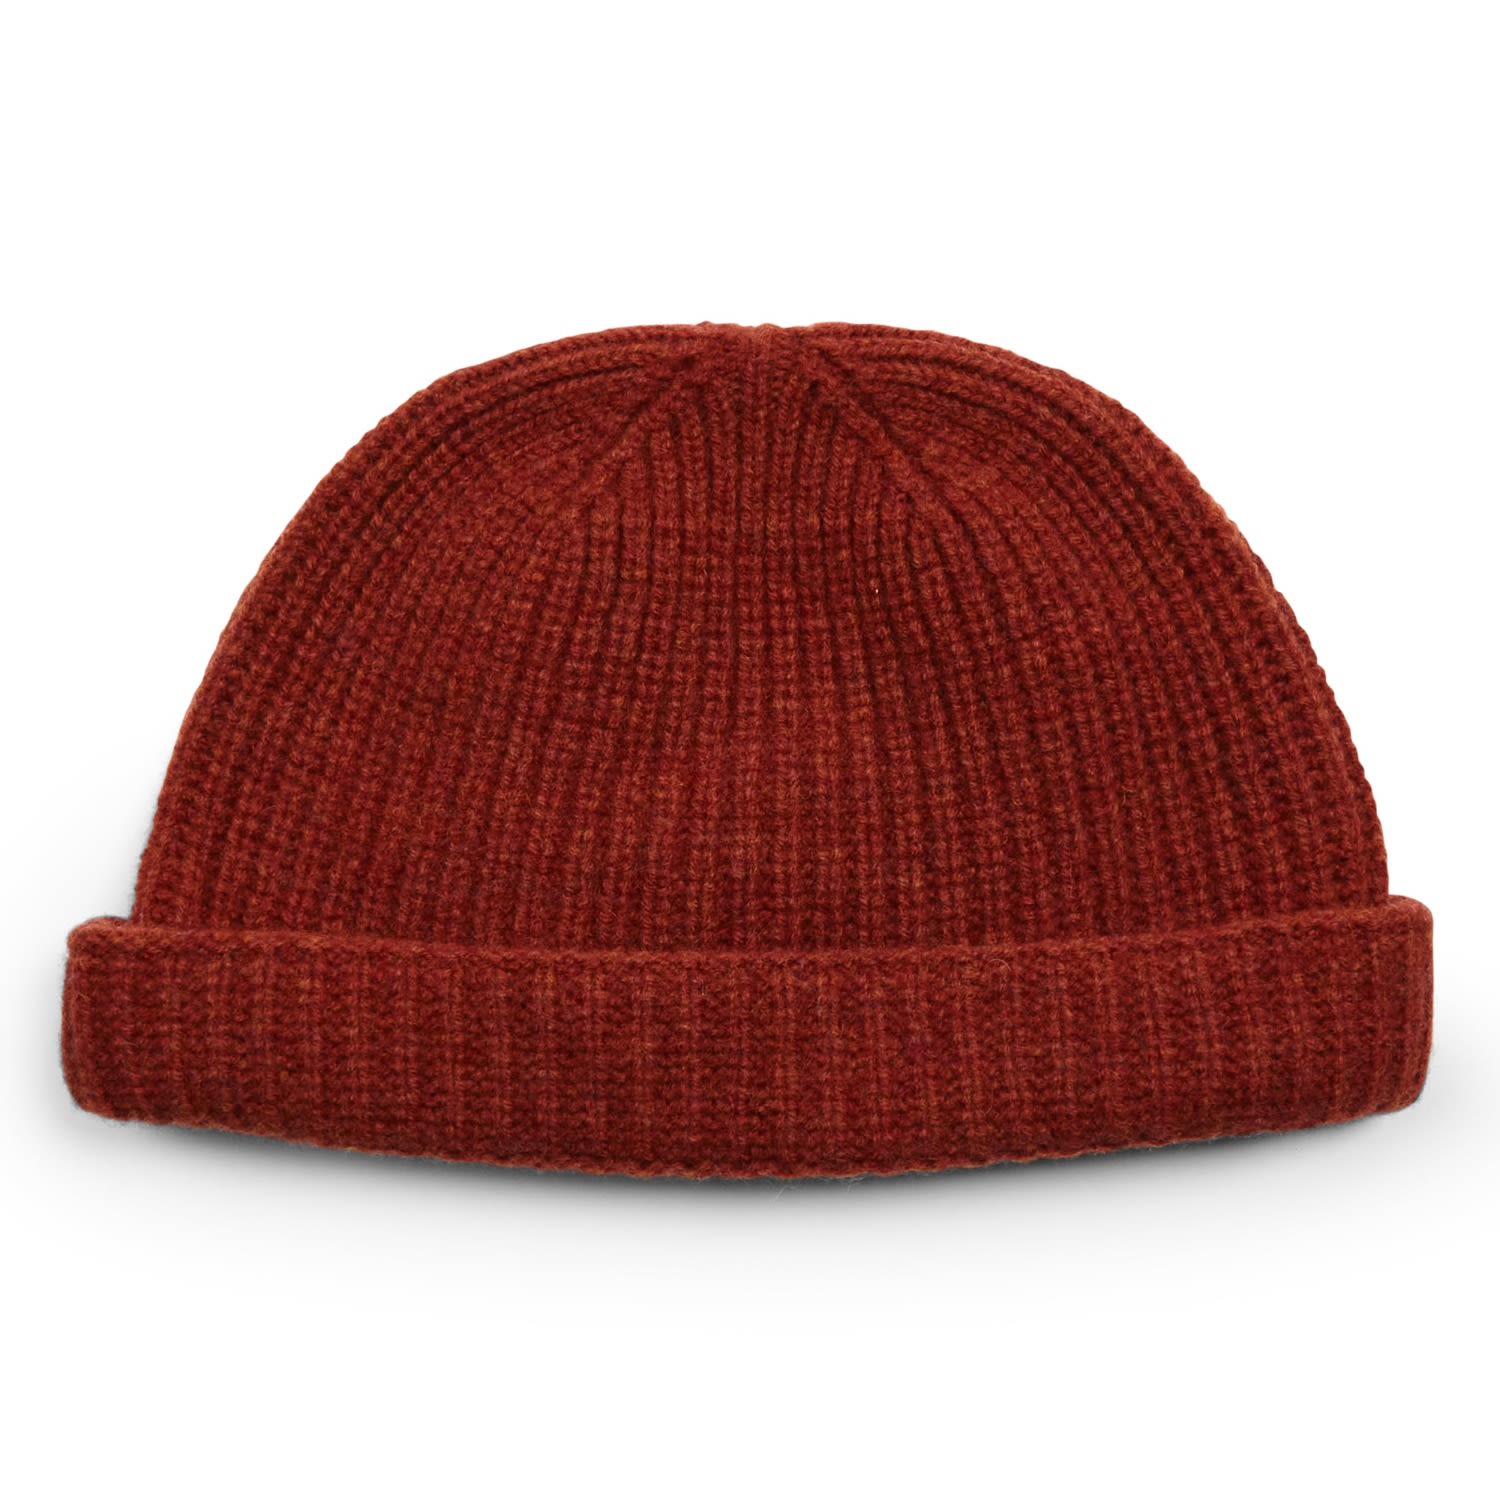 Burrows And Hare Men's Red Lambswool Beanie Hat - Rust